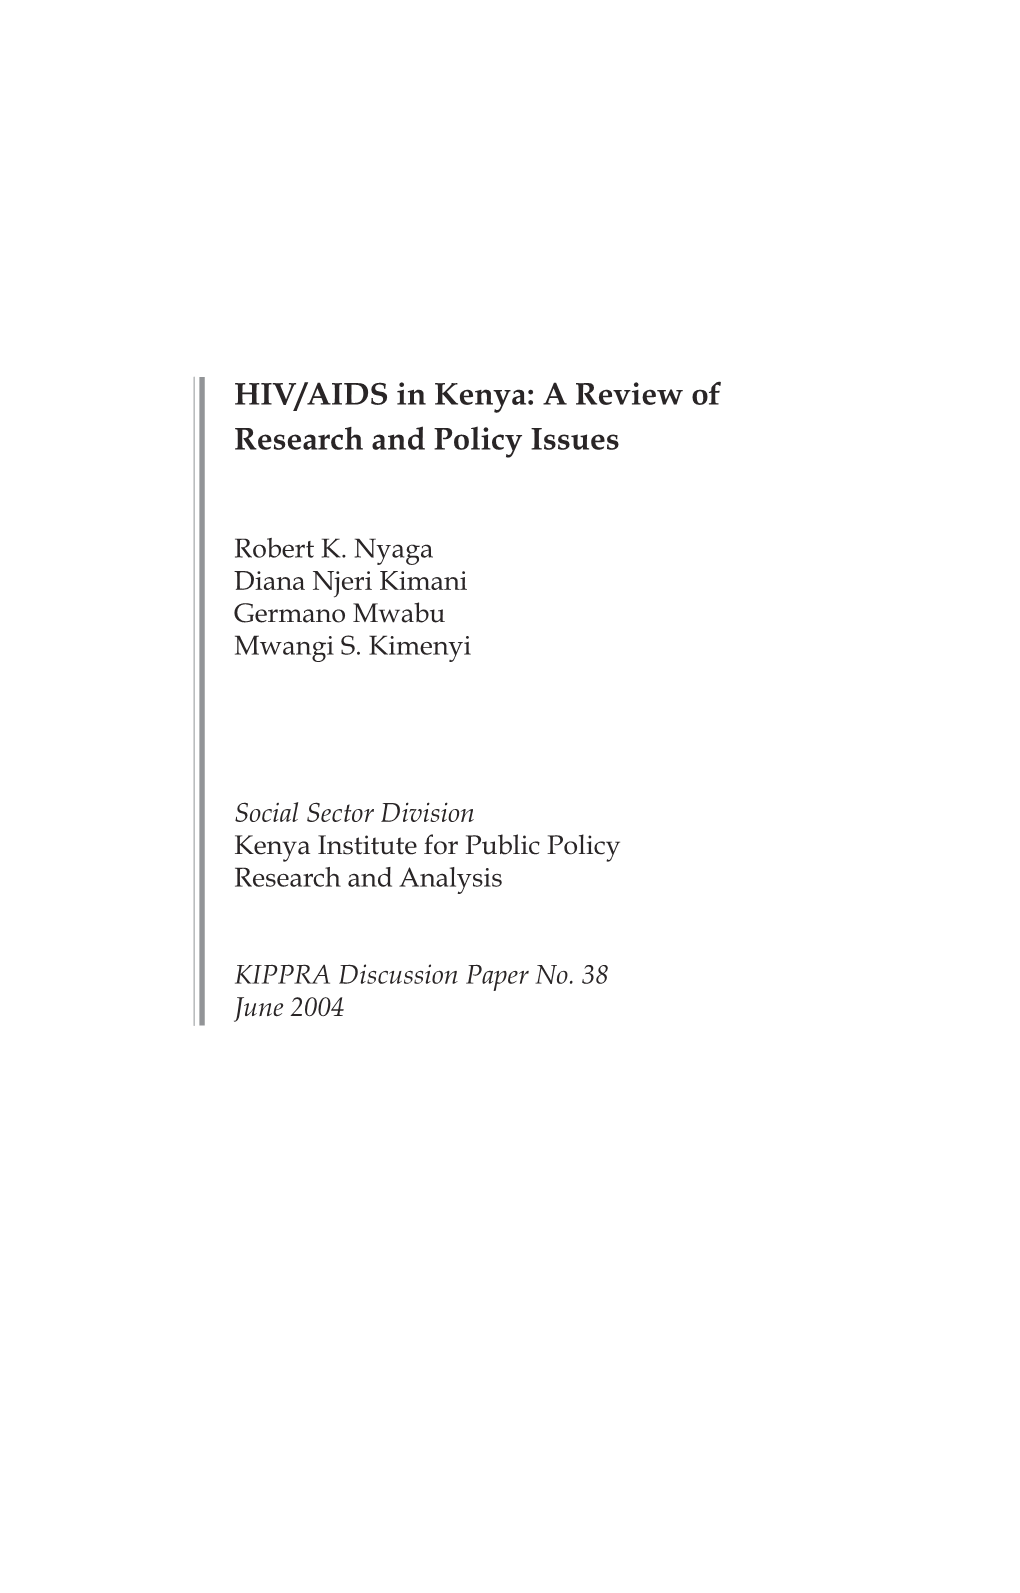 HIV/AIDS in Kenya: a Review of Research and Policy Issues